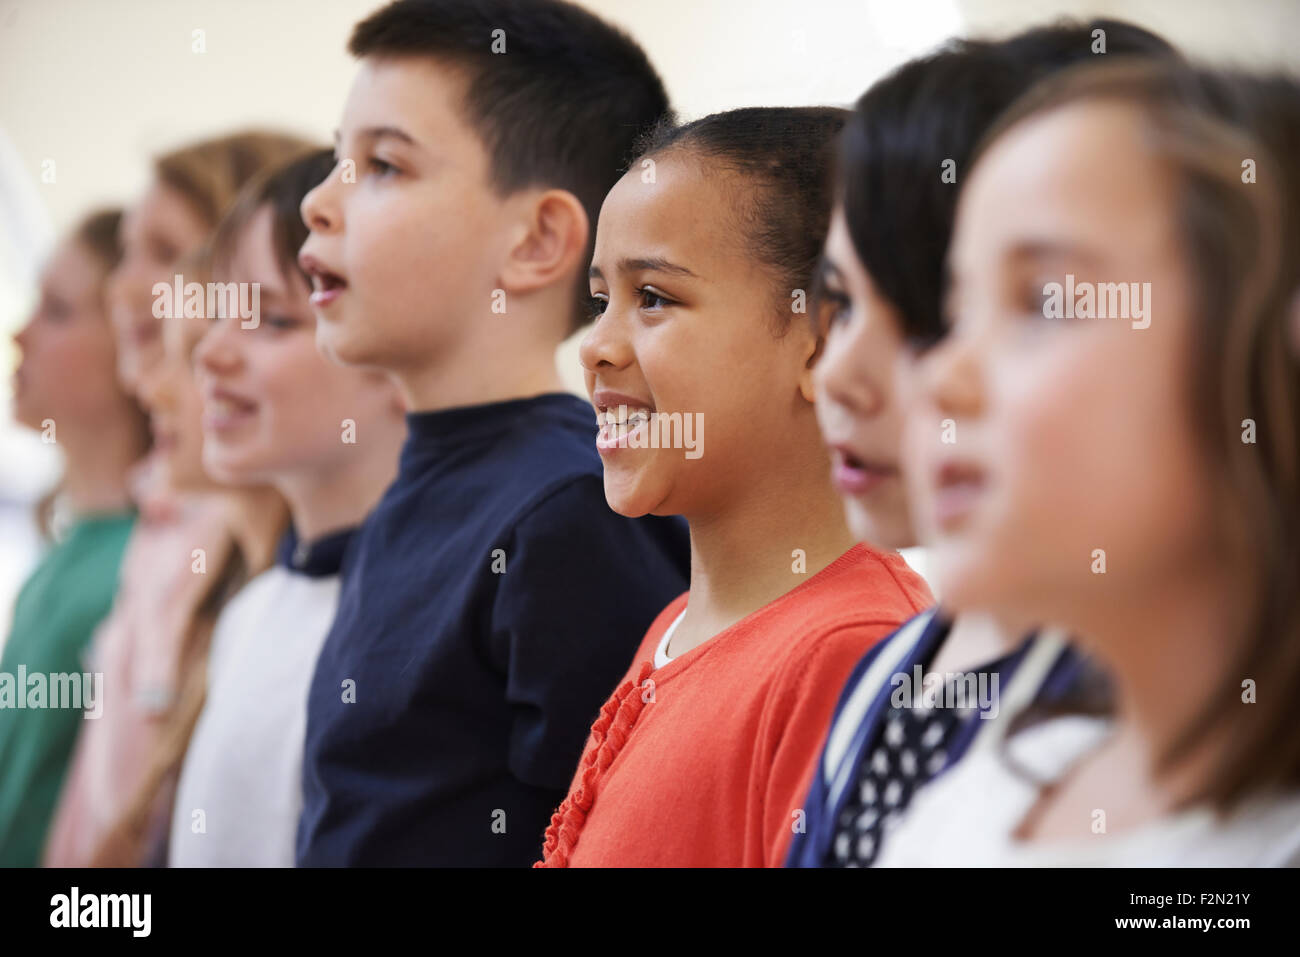 Group Of School Children Singing In Choir Together Stock Photo